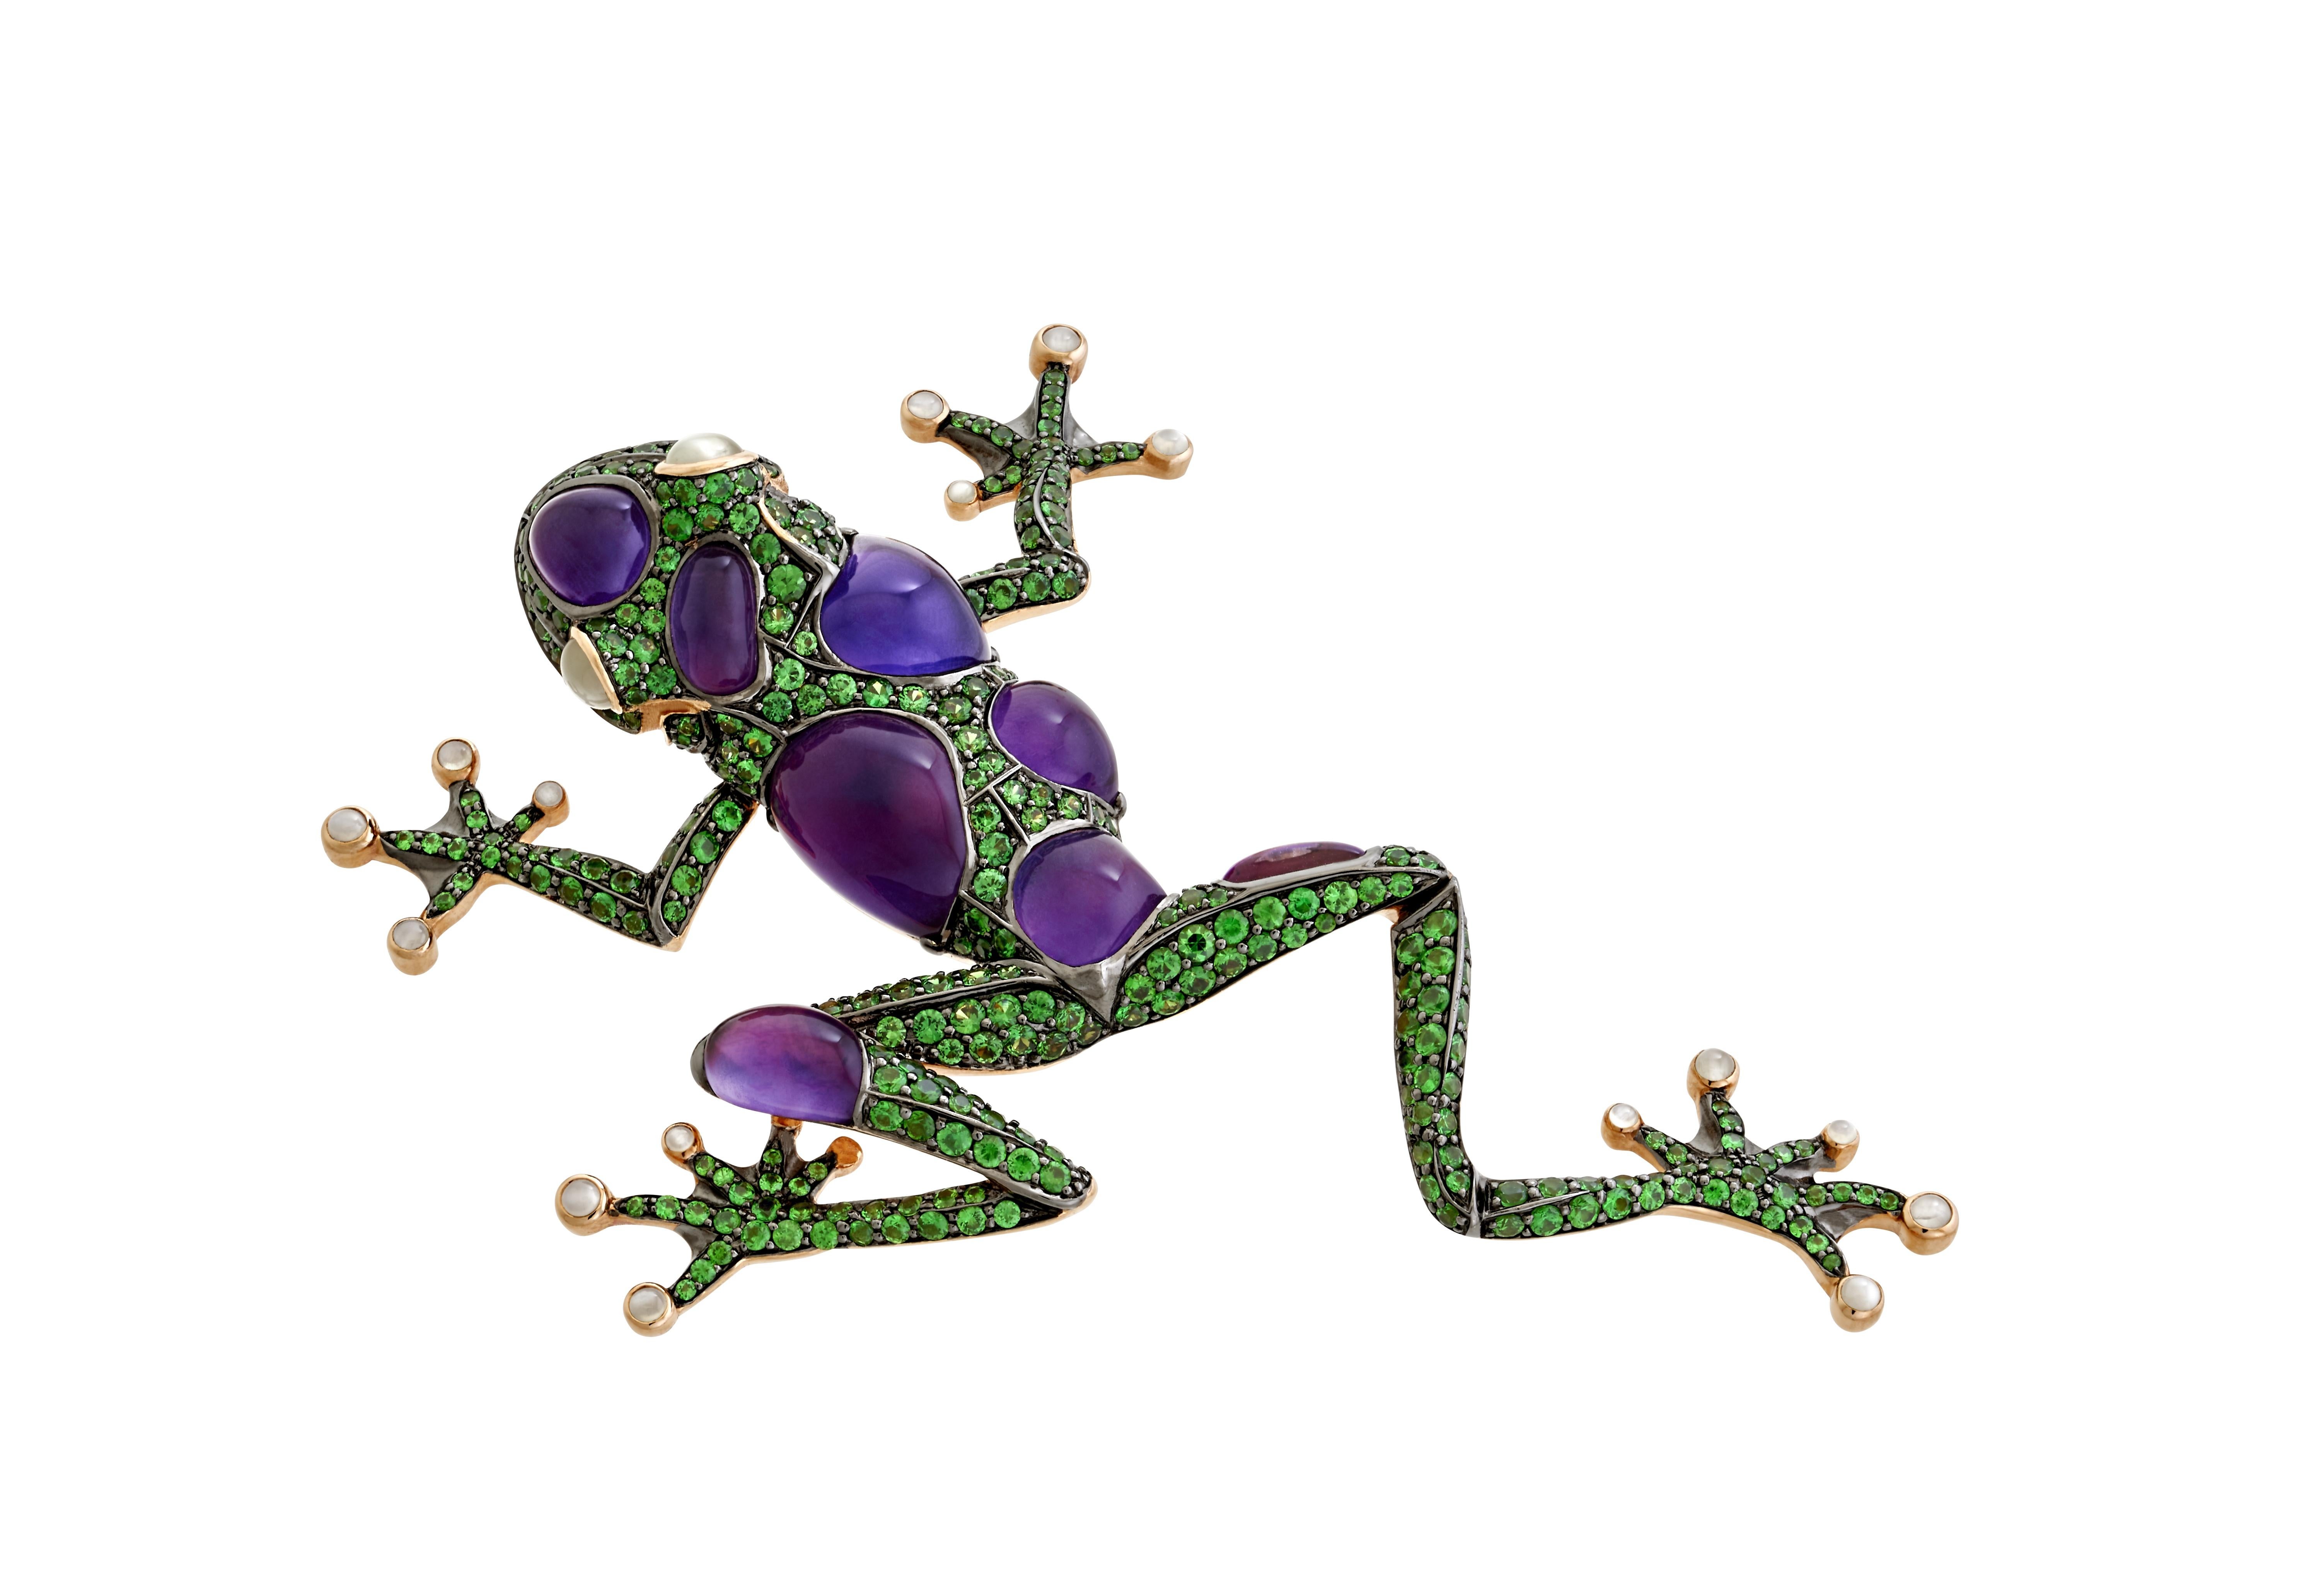 Matching Brooch Available 
Also Available in brown diamond and citrine 

When it comes to jewellery, frogs are most definitely lucky charms. The frog is a Native American symbol of wealth and prosperity. ... Owning and wearing an item